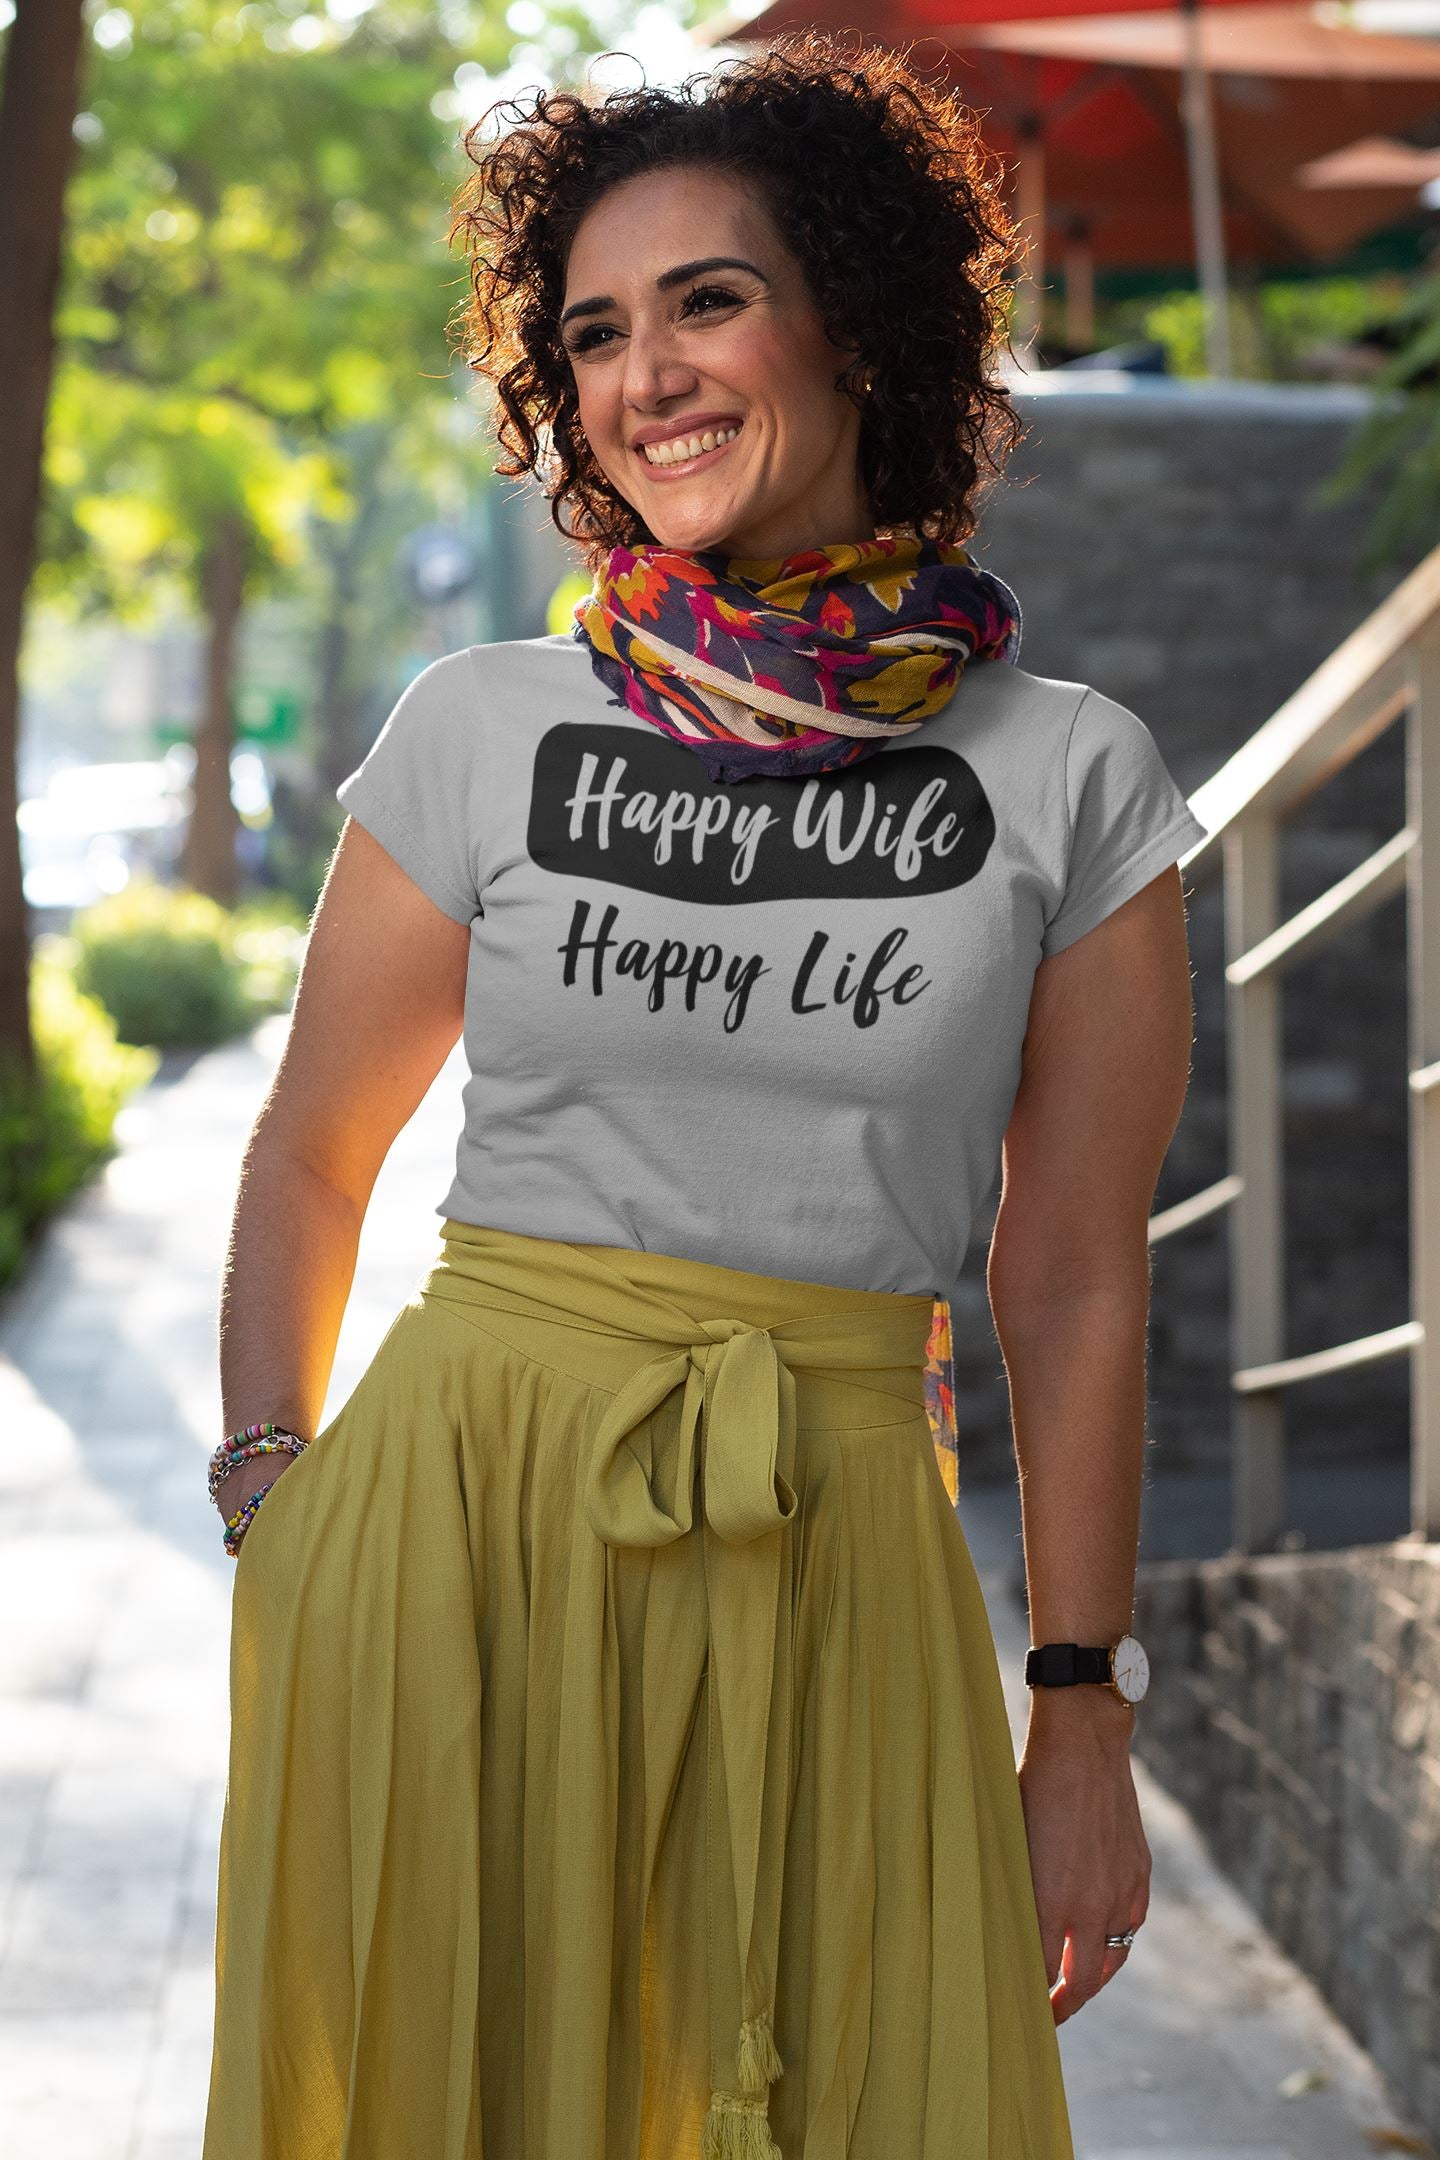 Happy Wife Happy Life Exclusive Light Grey T Shirt for Men and Women freeshipping - Catch My Drift India